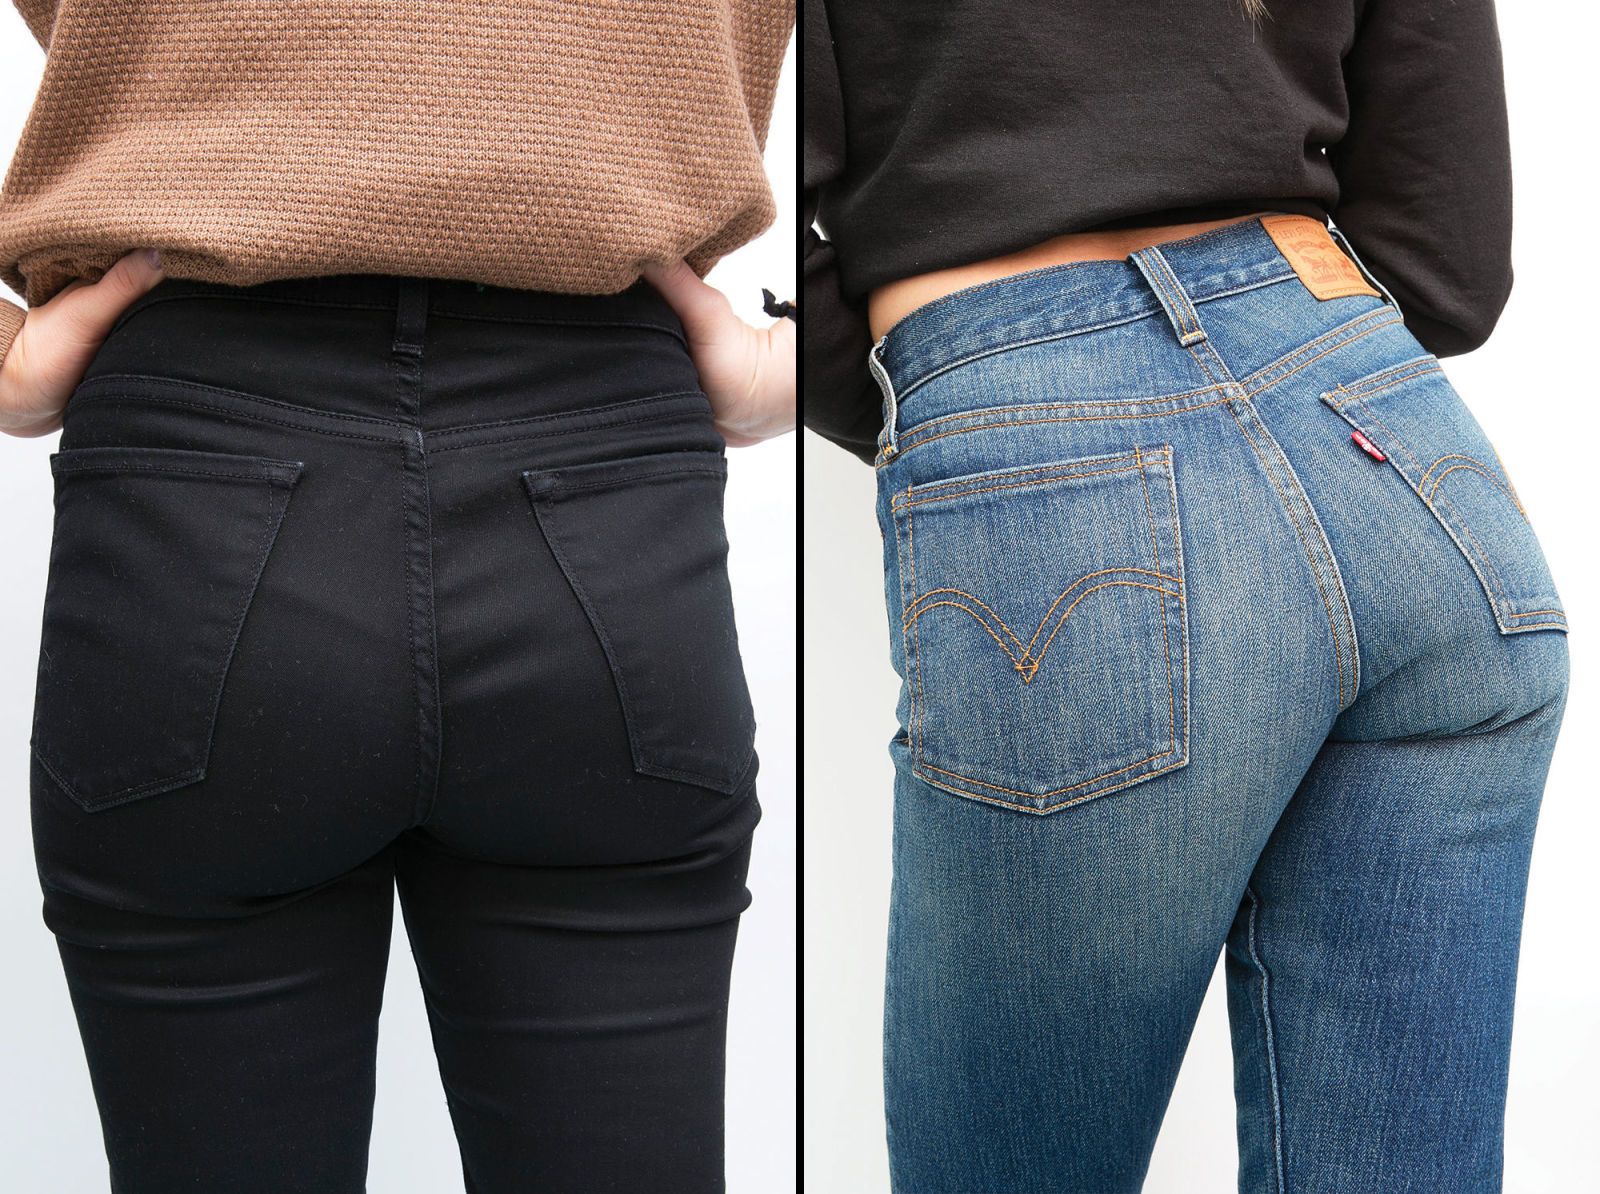 levis wedgie jeans dupe